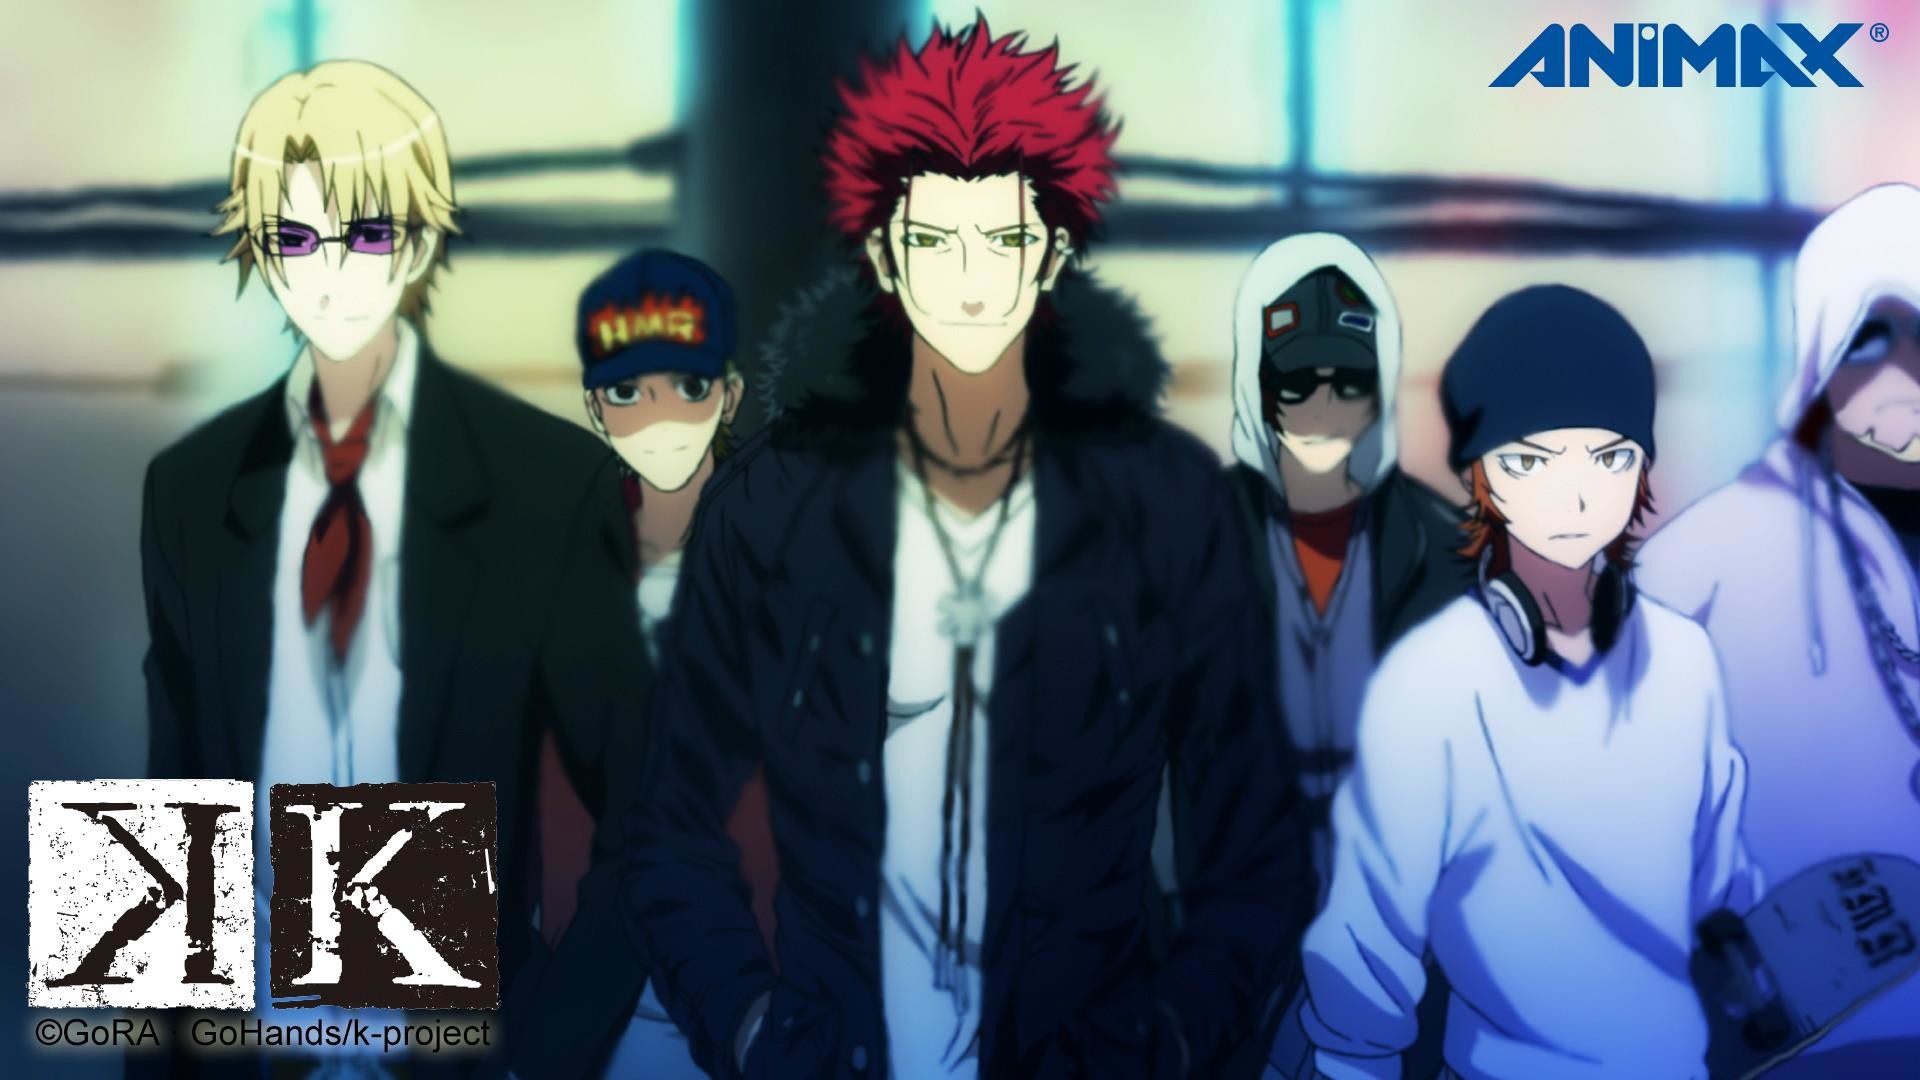 1920x1080 K images Mikoto HD wallpaper and background photos